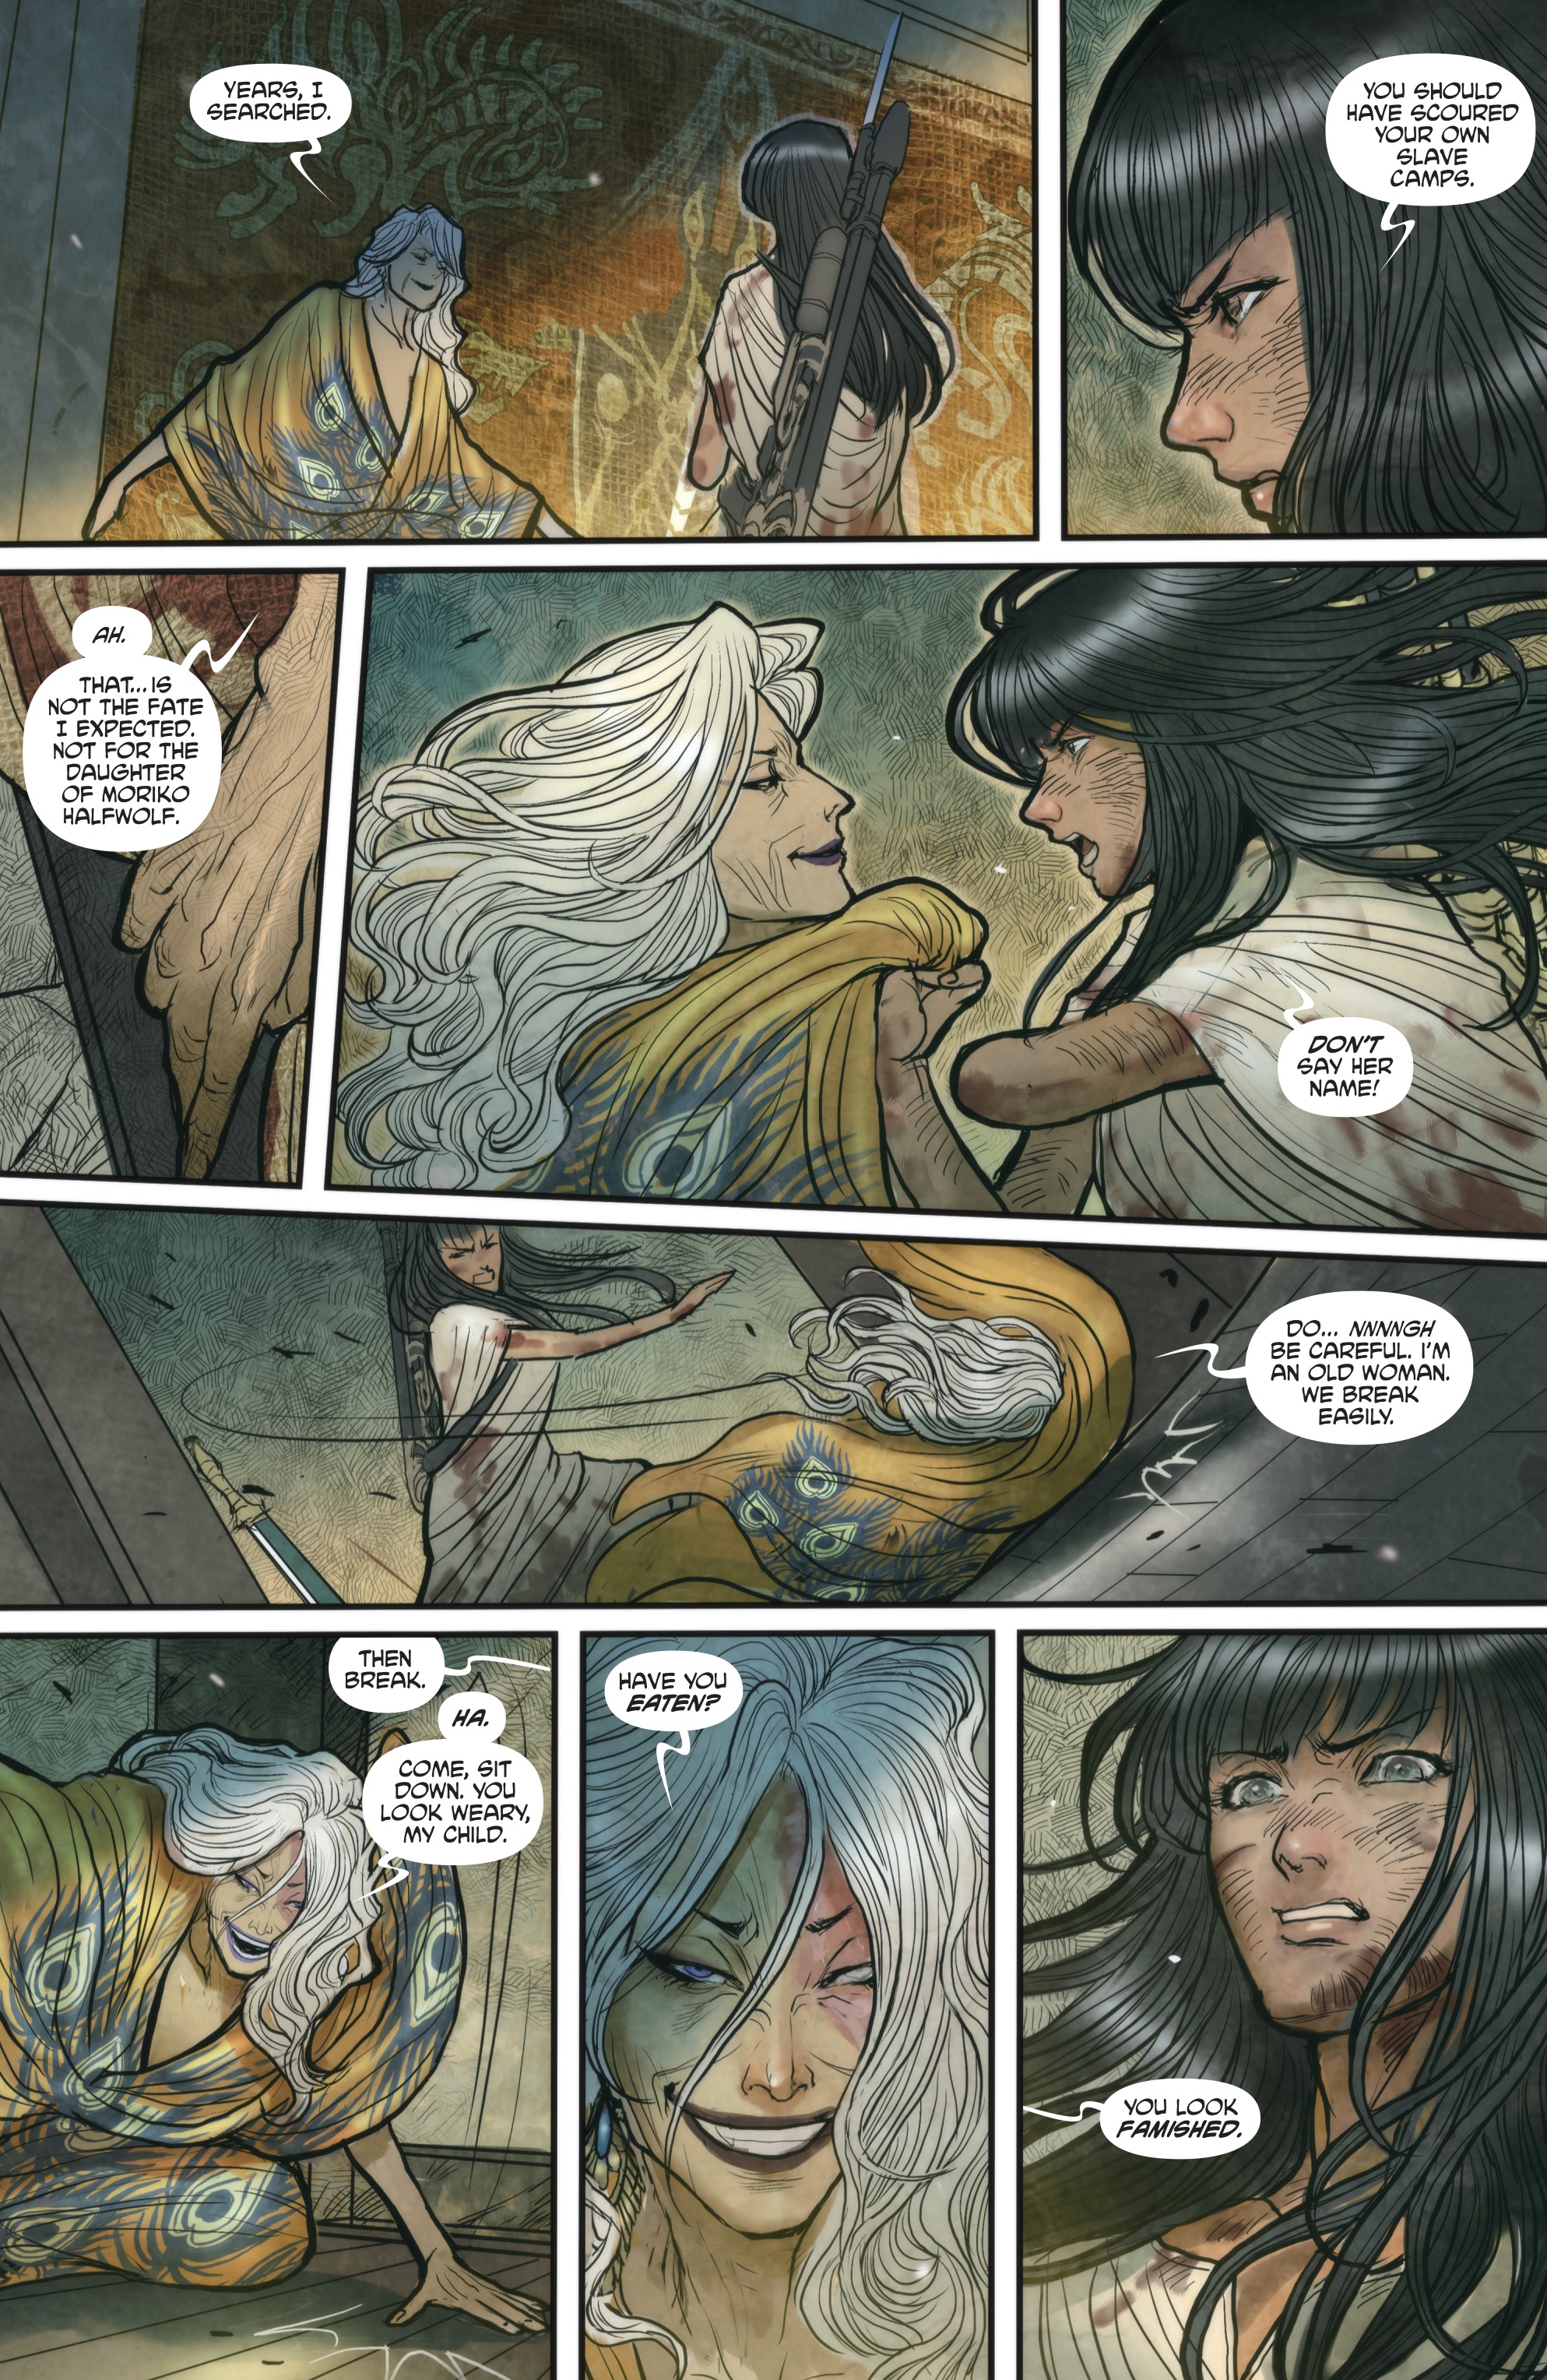 Monstress Issue 1 | Read Monstress Issue 1 comic online in high 